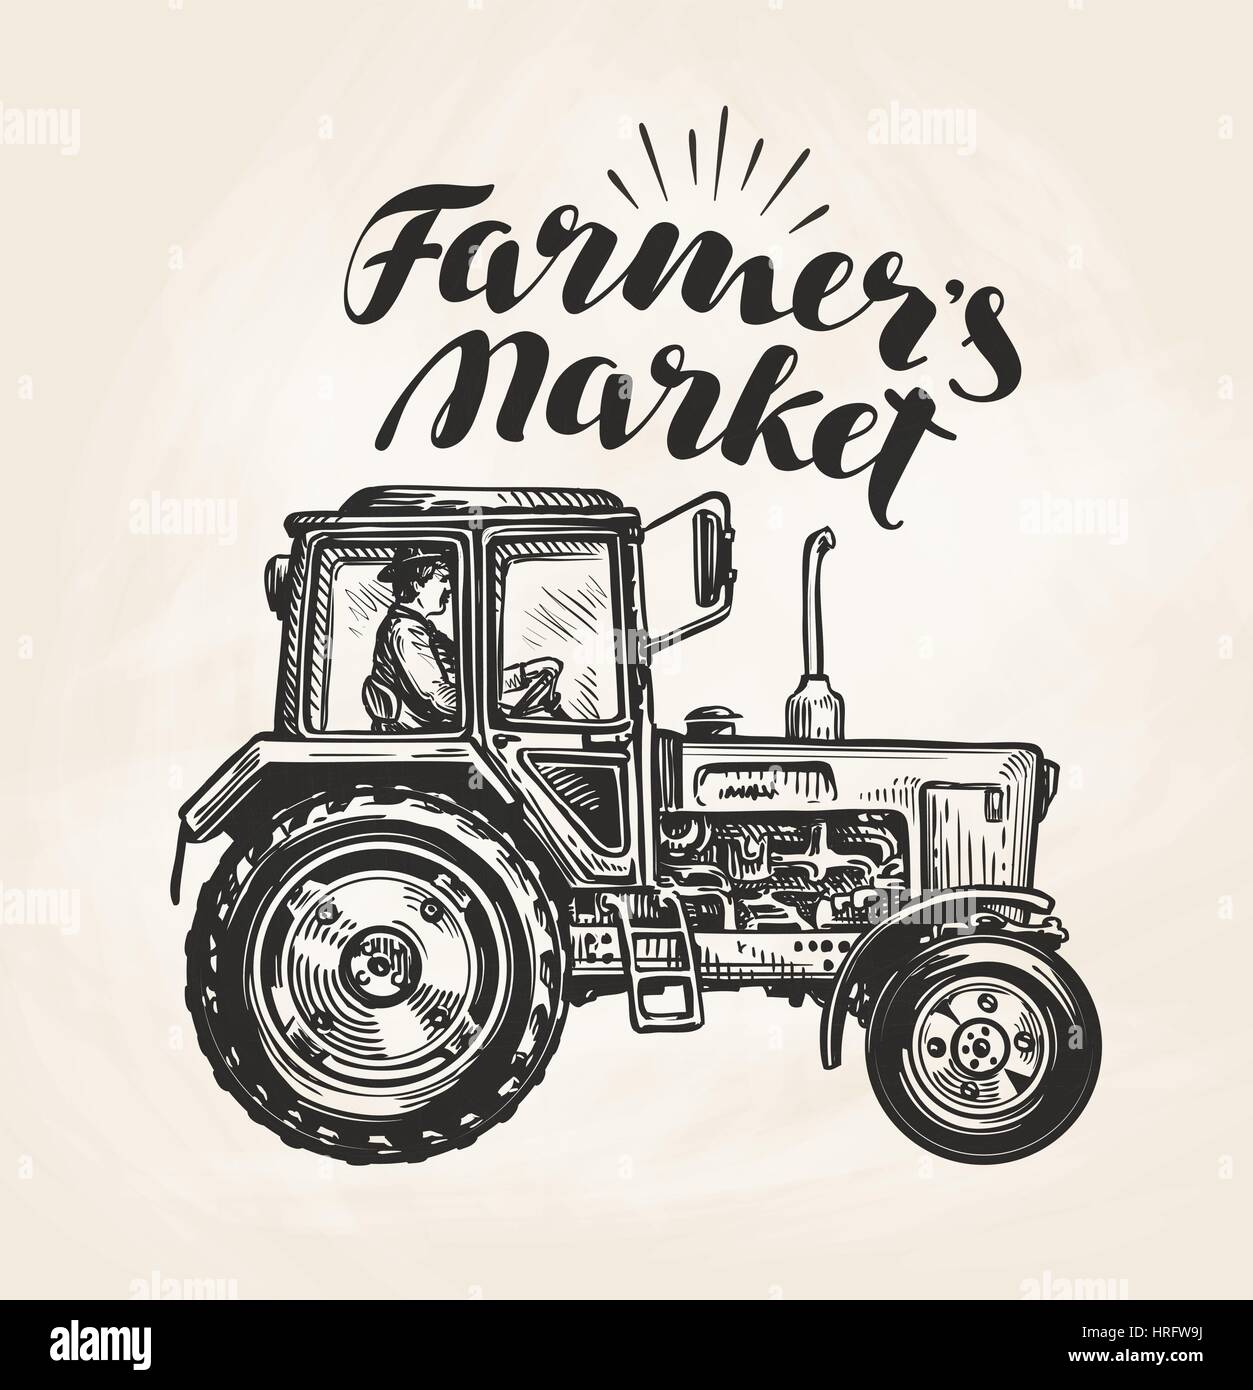 Farmer's market. Hand-drawn farmer rides on agricultural tractor, sketch. Farm, agriculture vector illustration Stock Vector